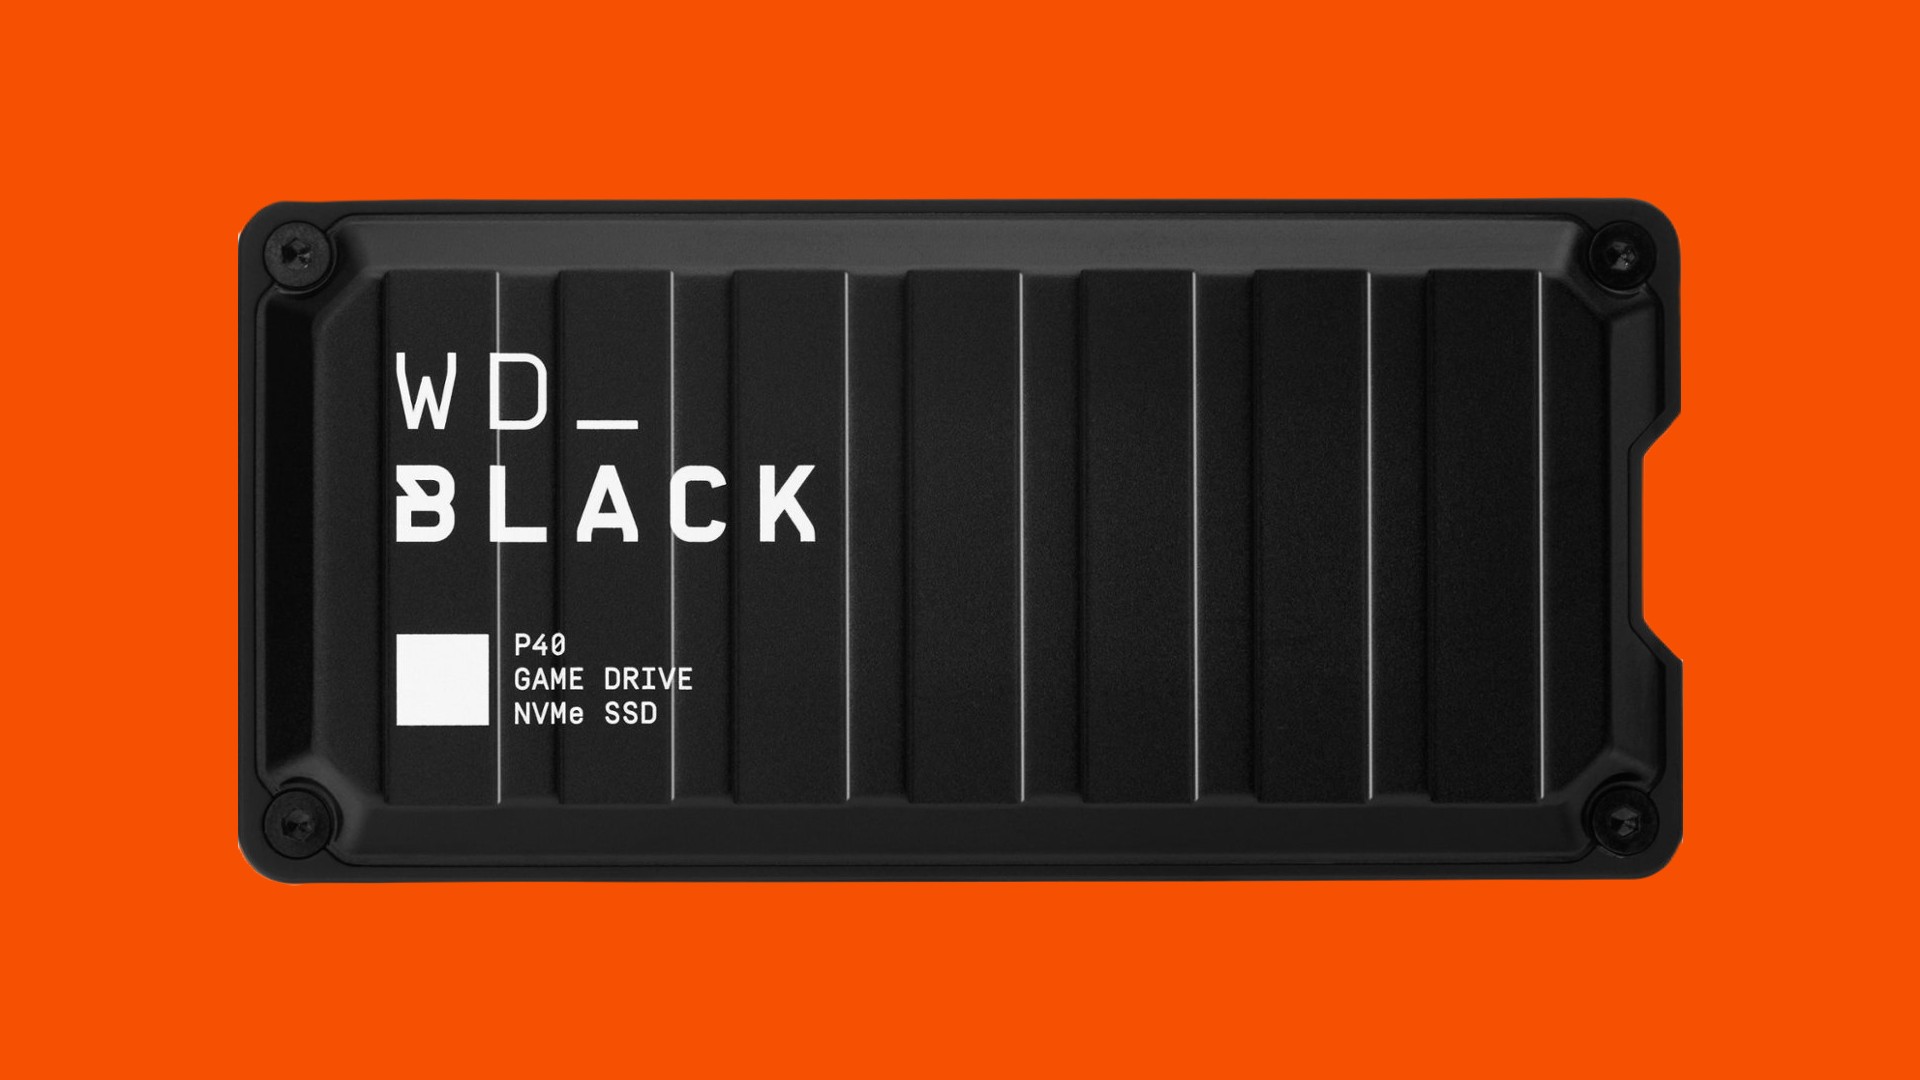 Save $60 on a WD Black drive in this external SSD deal